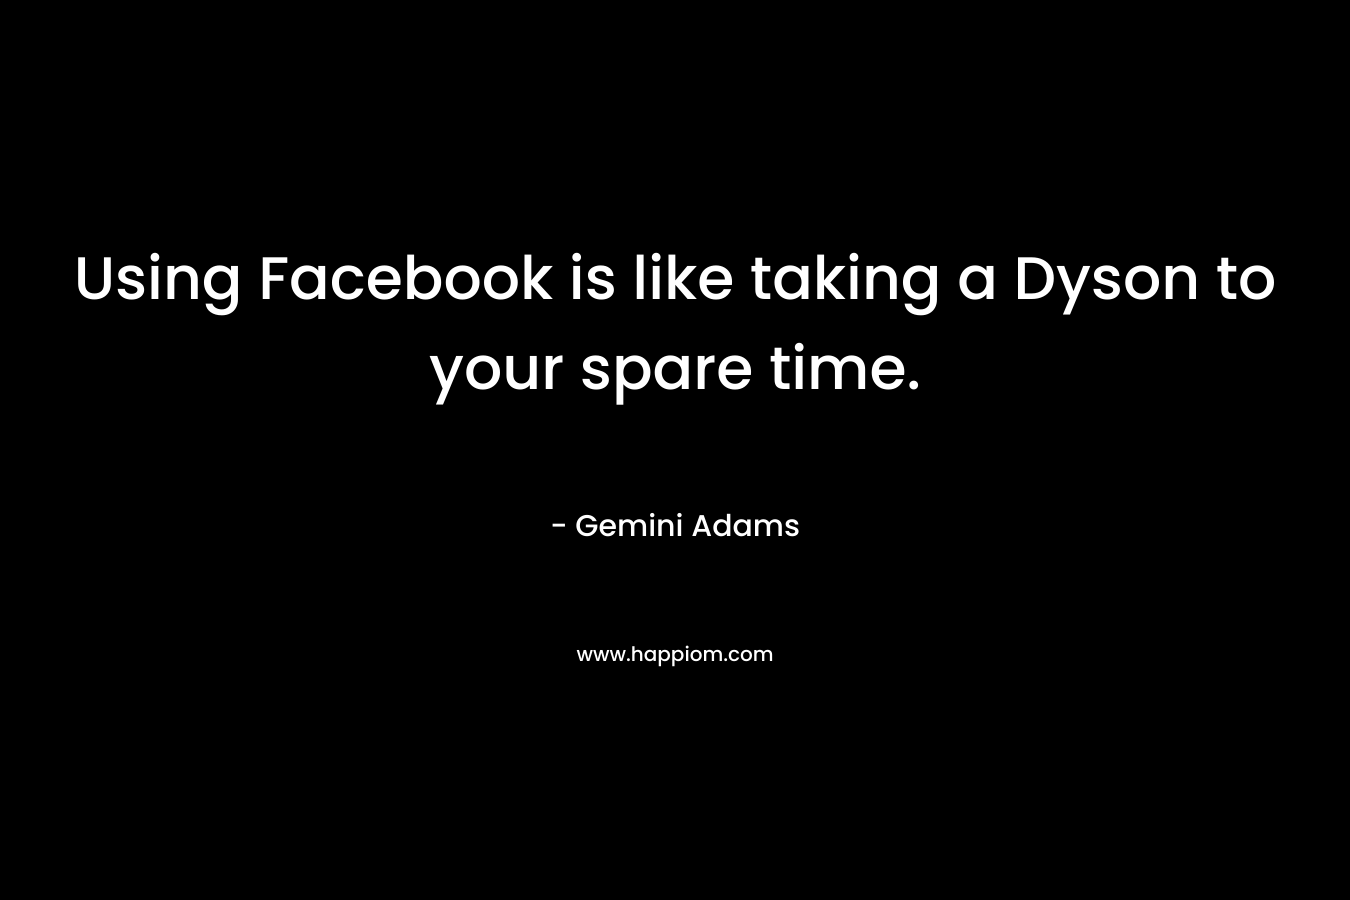 Using Facebook is like taking a Dyson to your spare time.